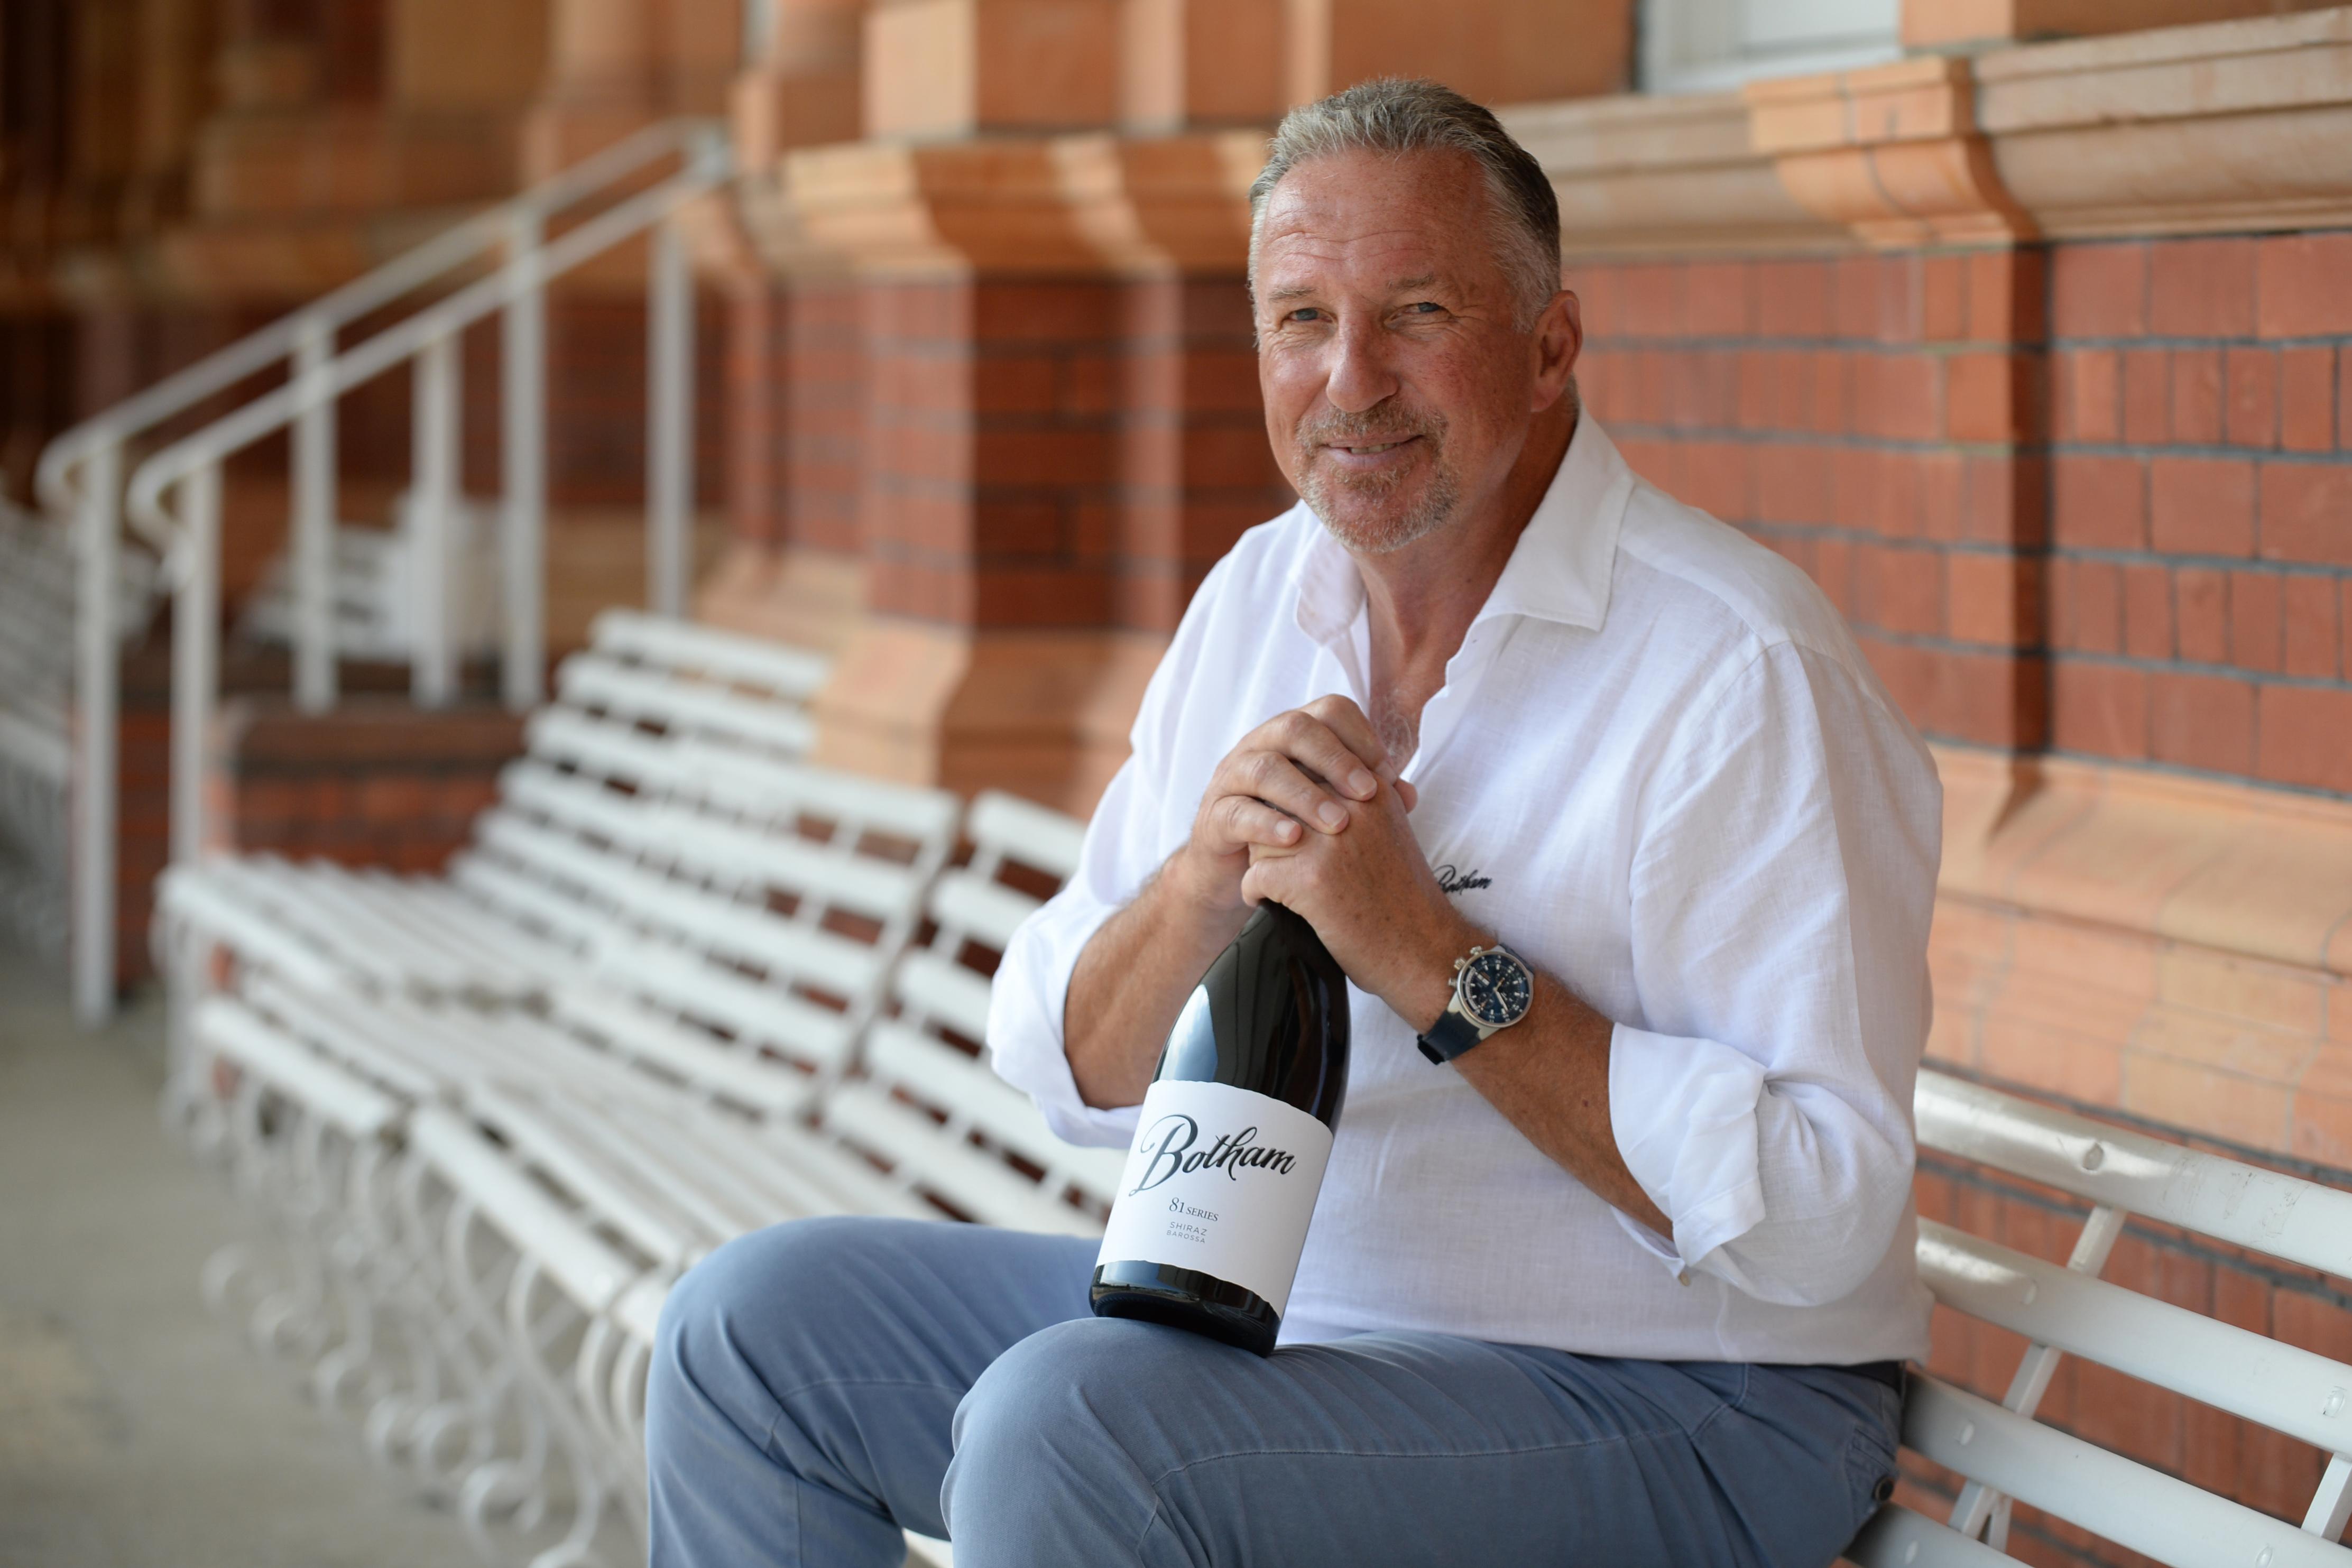 Sir Ian Botham’s wines are “better than a century at Lord’s”